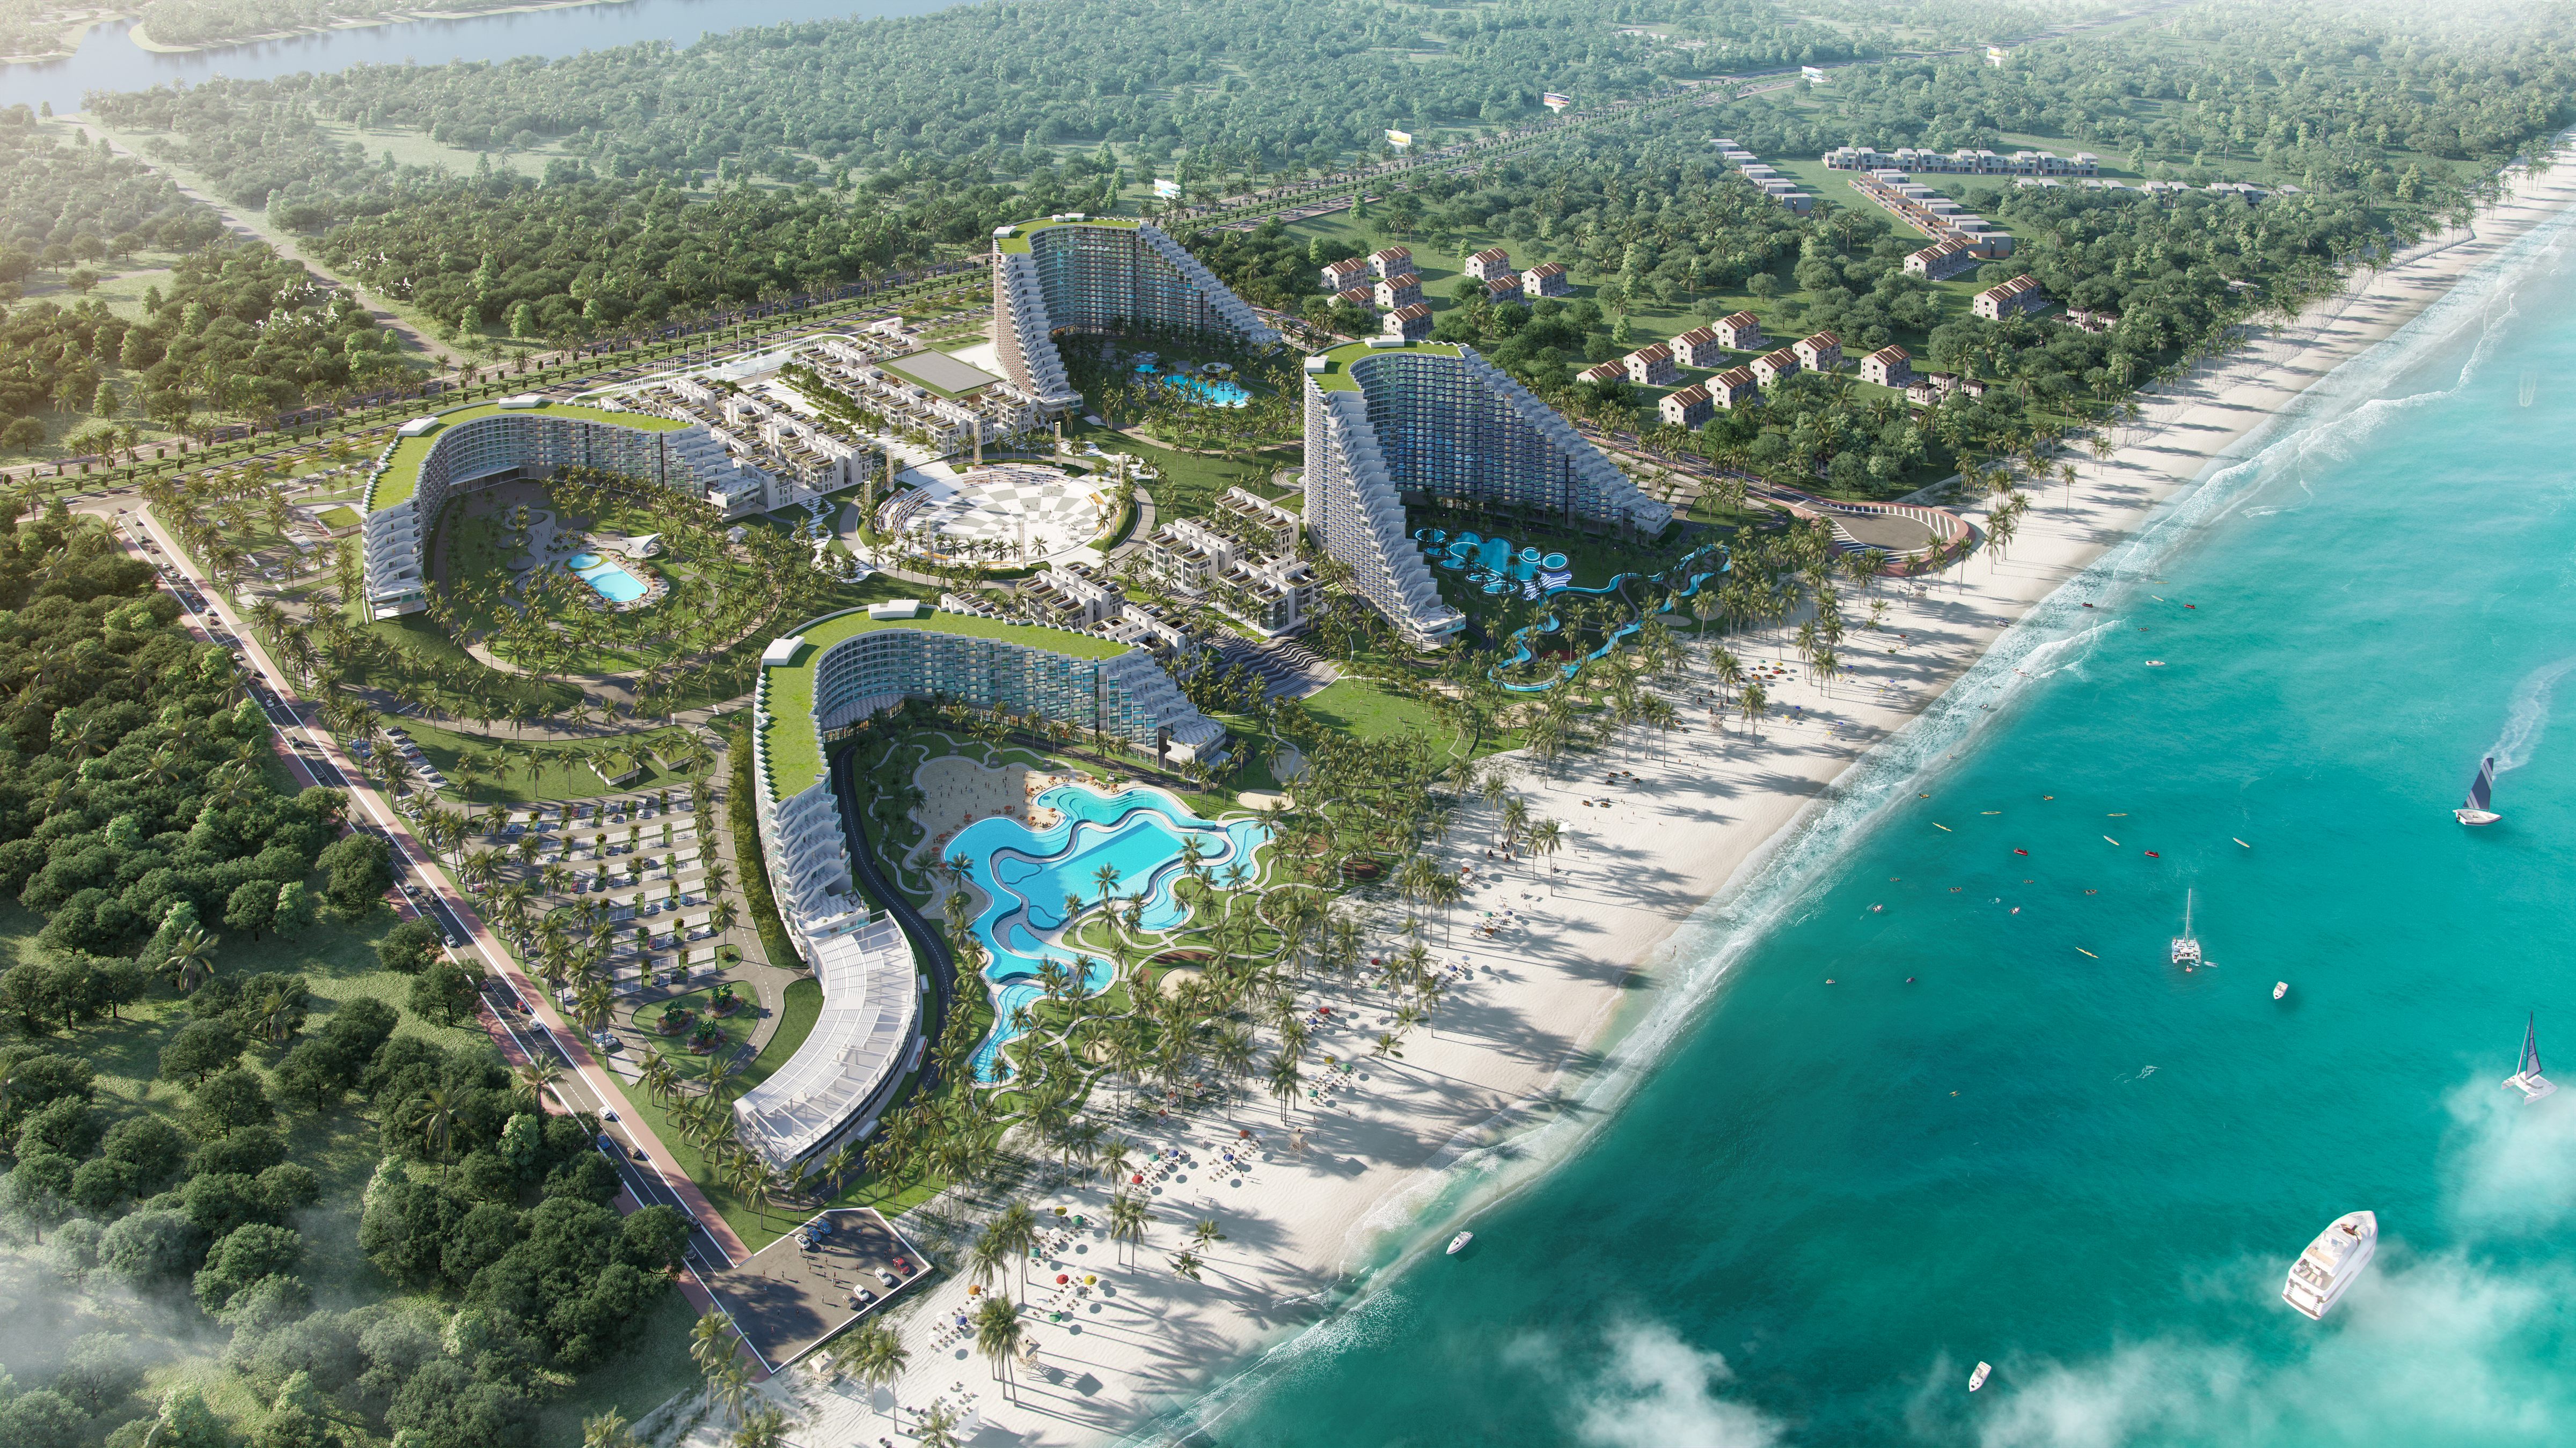 The Empyrean Cam Ranh Beach Resort is a wonderland like that – a unique destination promised to elevate your emotion from take-off to many return landings thereafter.